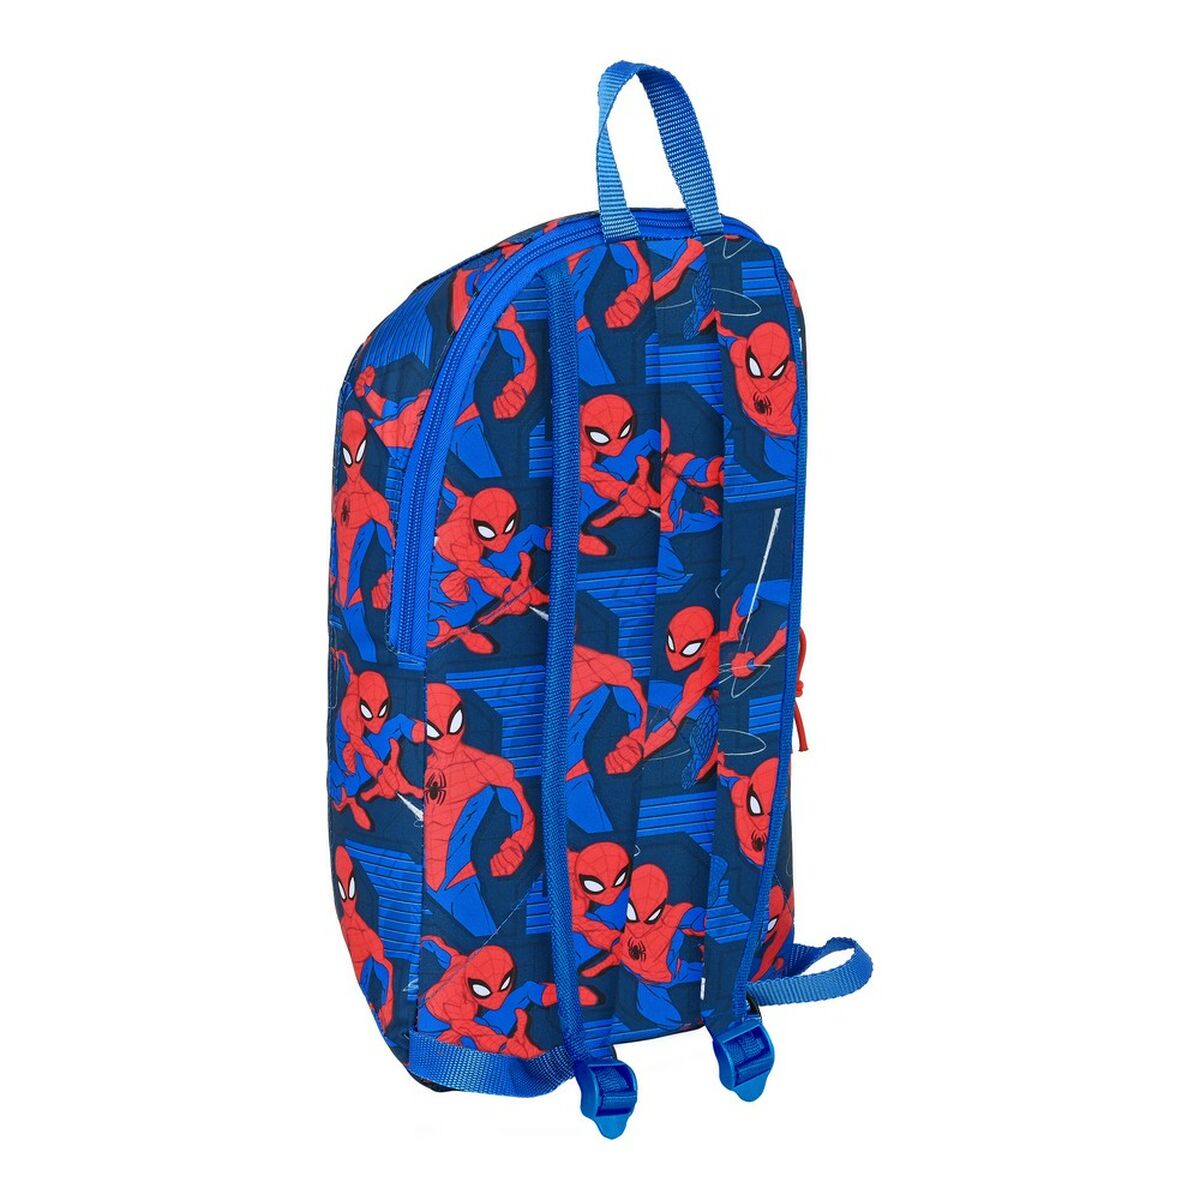 Casual Rugtas Spider-Man Great power Blauw Rood 22 x 39 x 10 cm